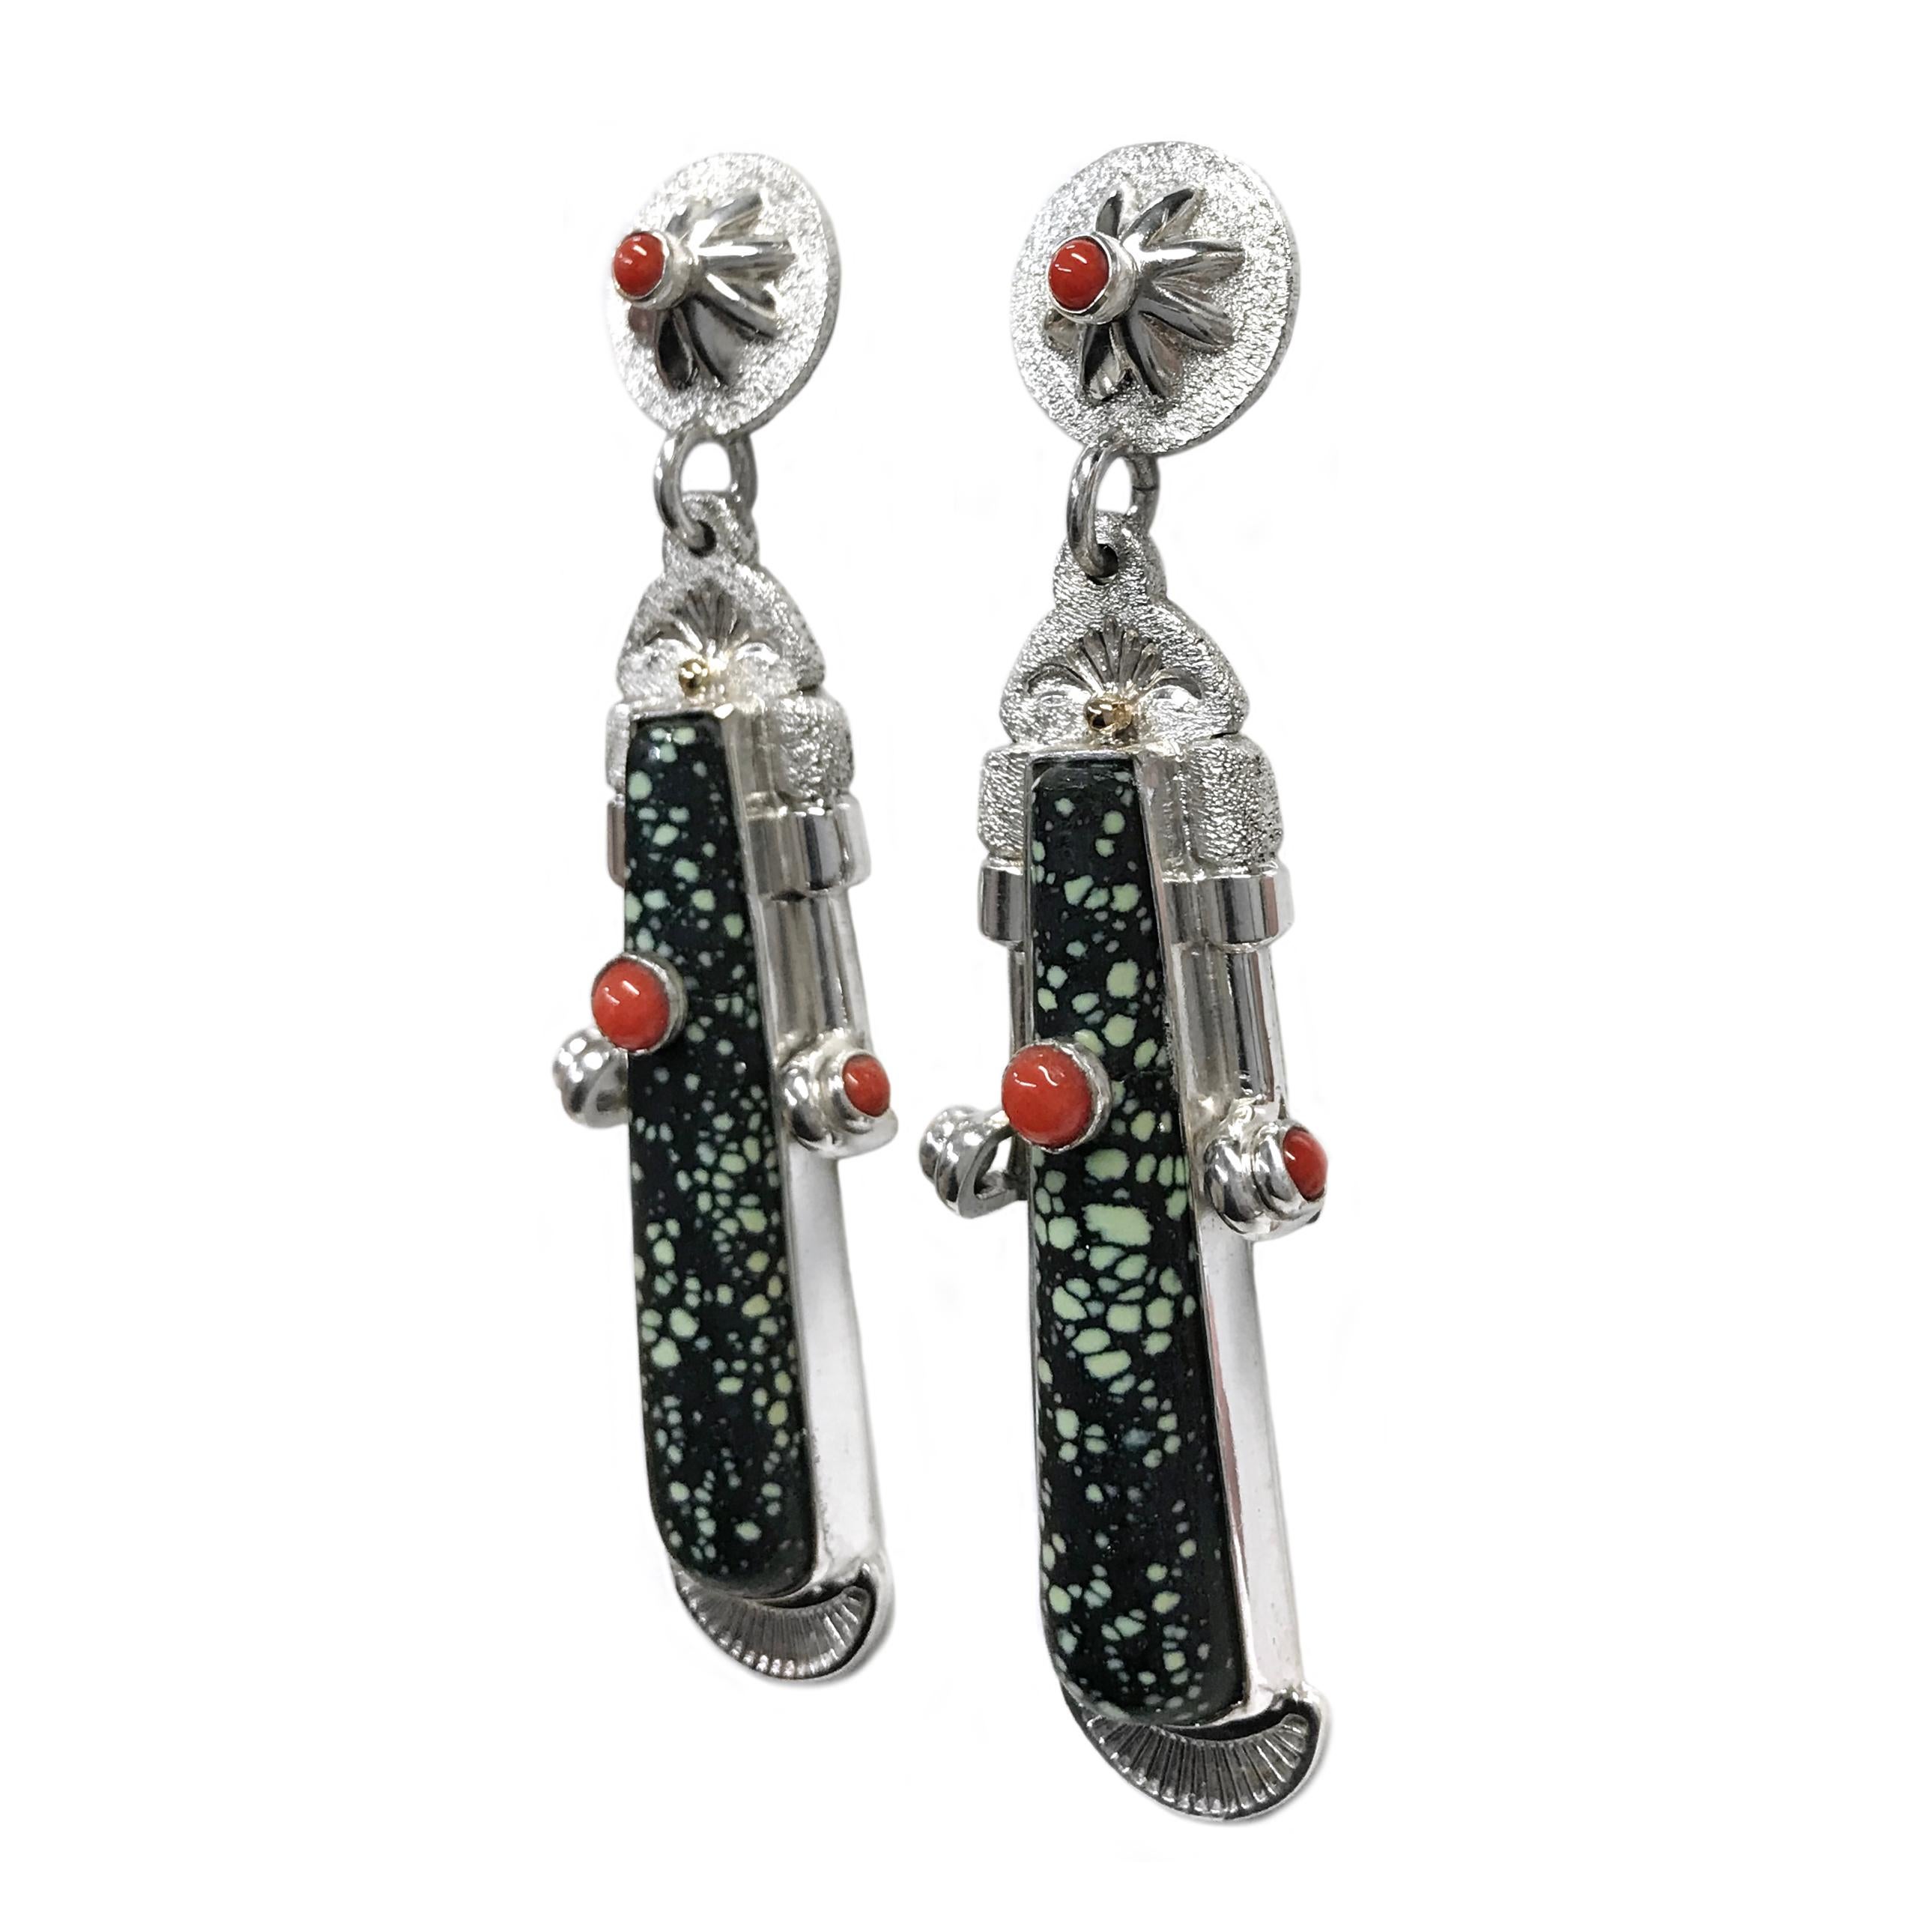 Handcrafted from Sterling Silver with 14k accents by jewelry maker, Ray Winner. These one-of-a-kind earrings feature a natural speckled New Lander Turquoise cabochon and Mediterranean Coral round cabochons. Two gold beads service as accent pieces on